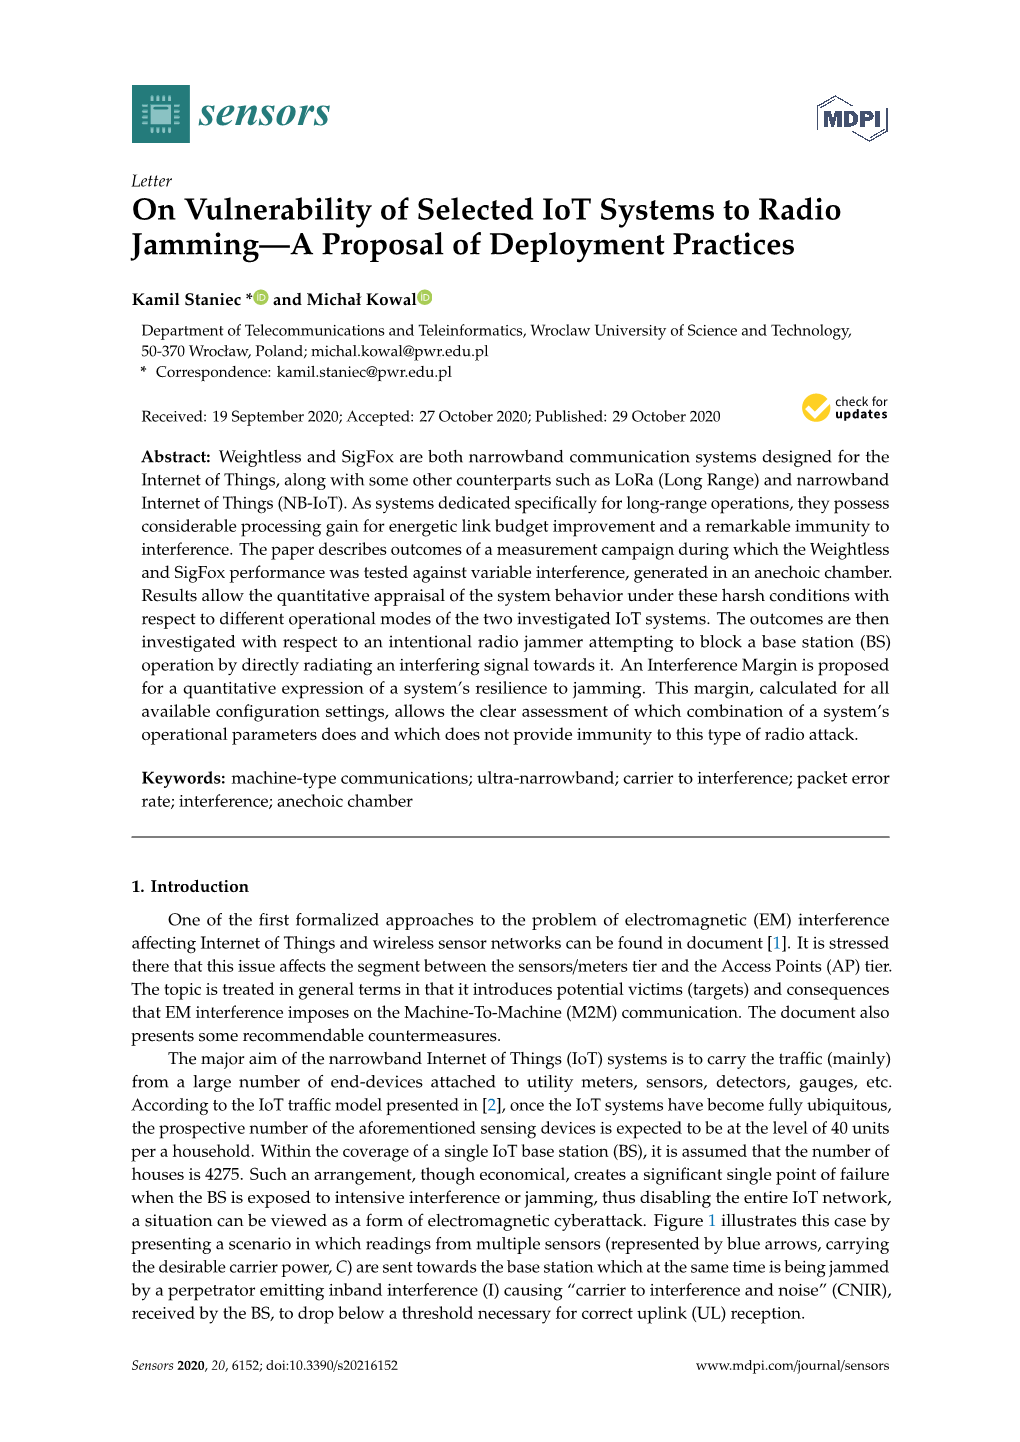 On Vulnerability of Selected Iot Systems to Radio Jamming—A Proposal of Deployment Practices